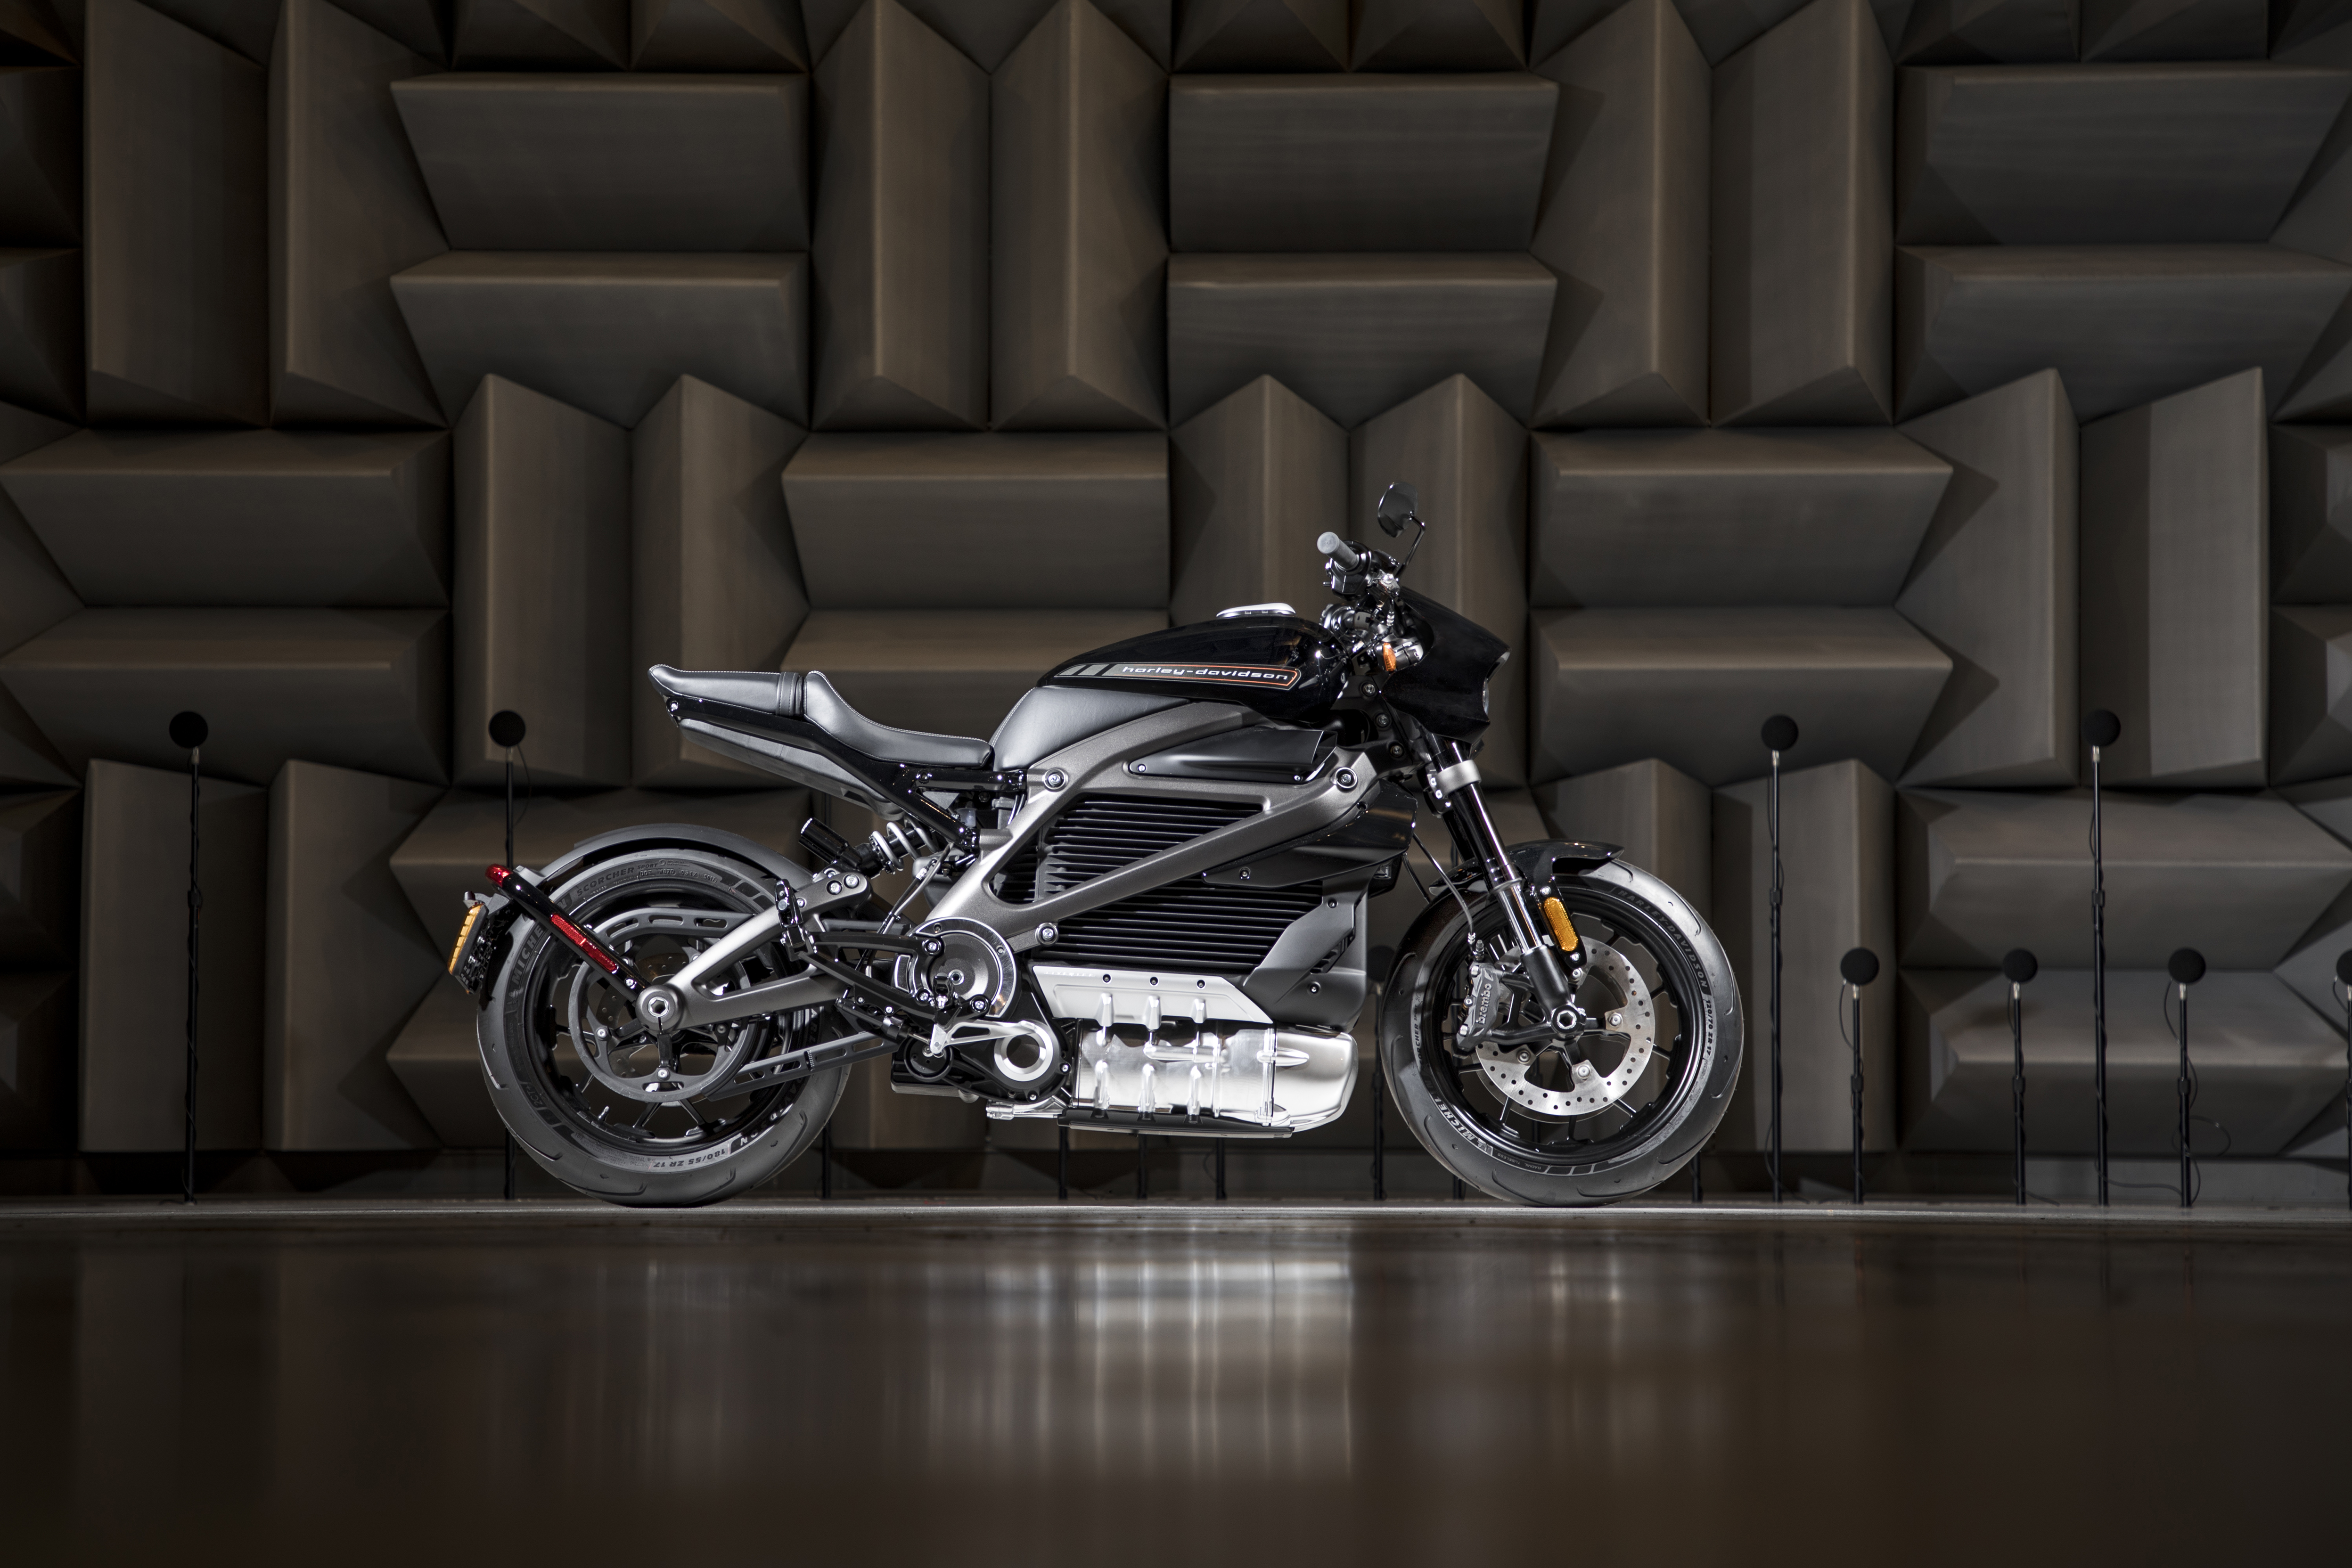 Harley-Davidson Shows All-Electric LiveWire Motorcycle in Milan